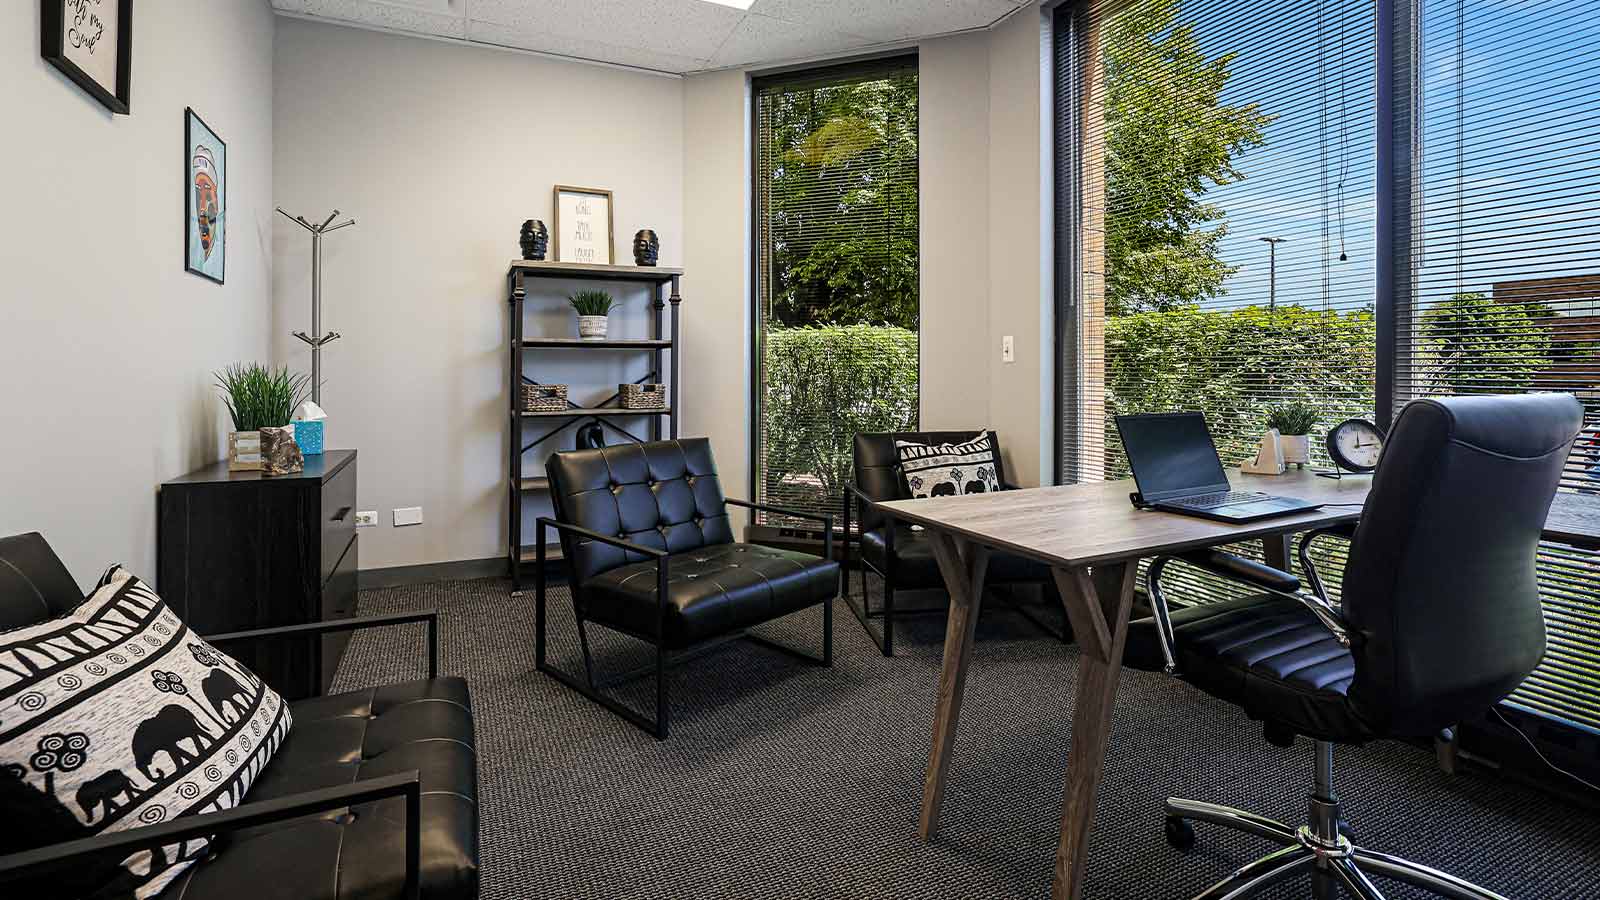 A professional office setting with modern furniture and a large window revealing outdoor greenery.